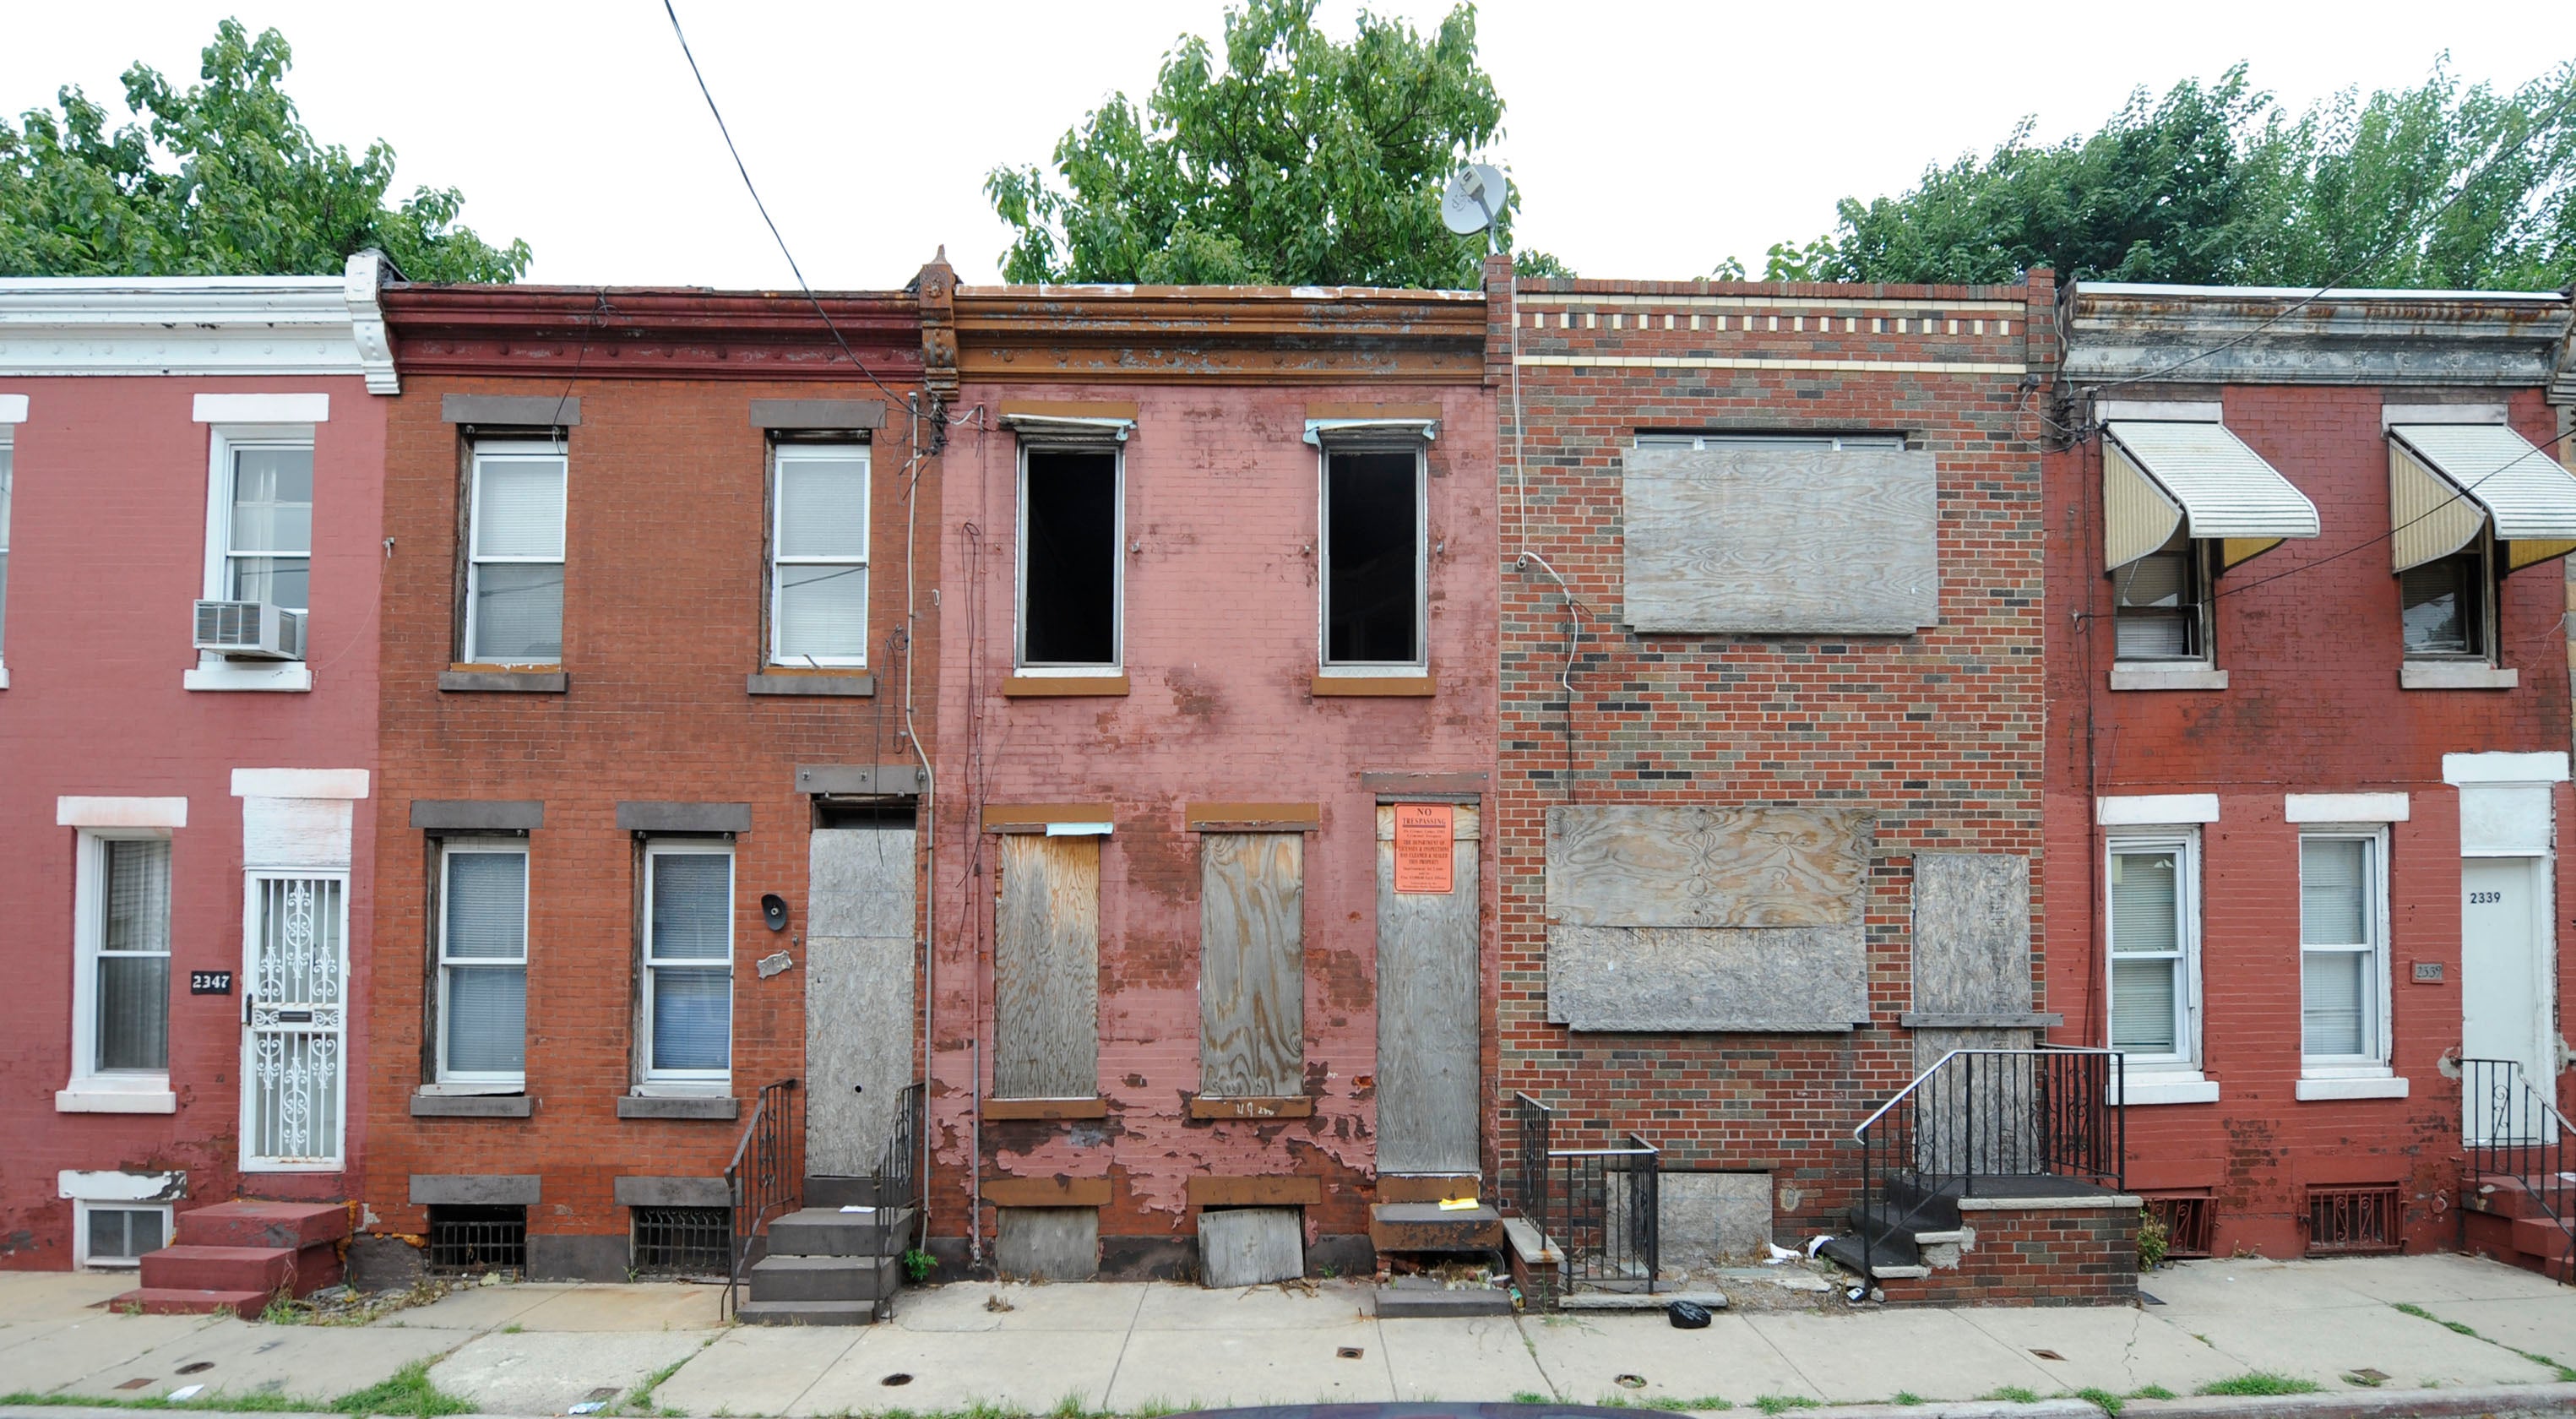 Abandoned tax delinquent property on the 2300 block of Gerrit Street in Point Breeze (Clem Murray / Inquirer)